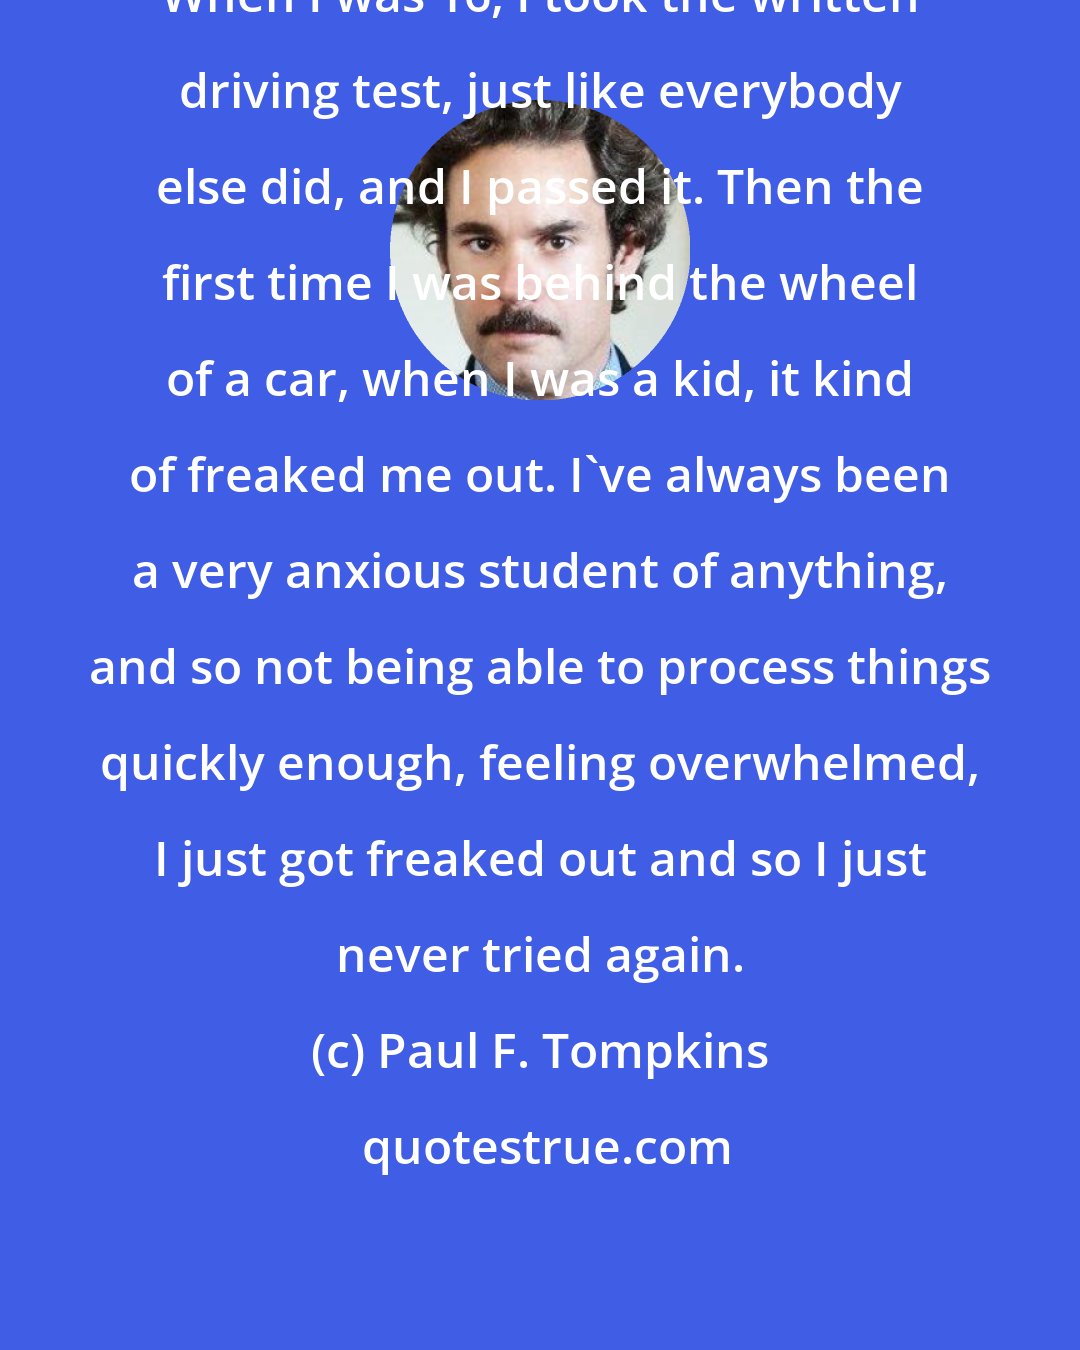 Paul F. Tompkins: When I was 16, I took the written driving test, just like everybody else did, and I passed it. Then the first time I was behind the wheel of a car, when I was a kid, it kind of freaked me out. I've always been a very anxious student of anything, and so not being able to process things quickly enough, feeling overwhelmed, I just got freaked out and so I just never tried again.